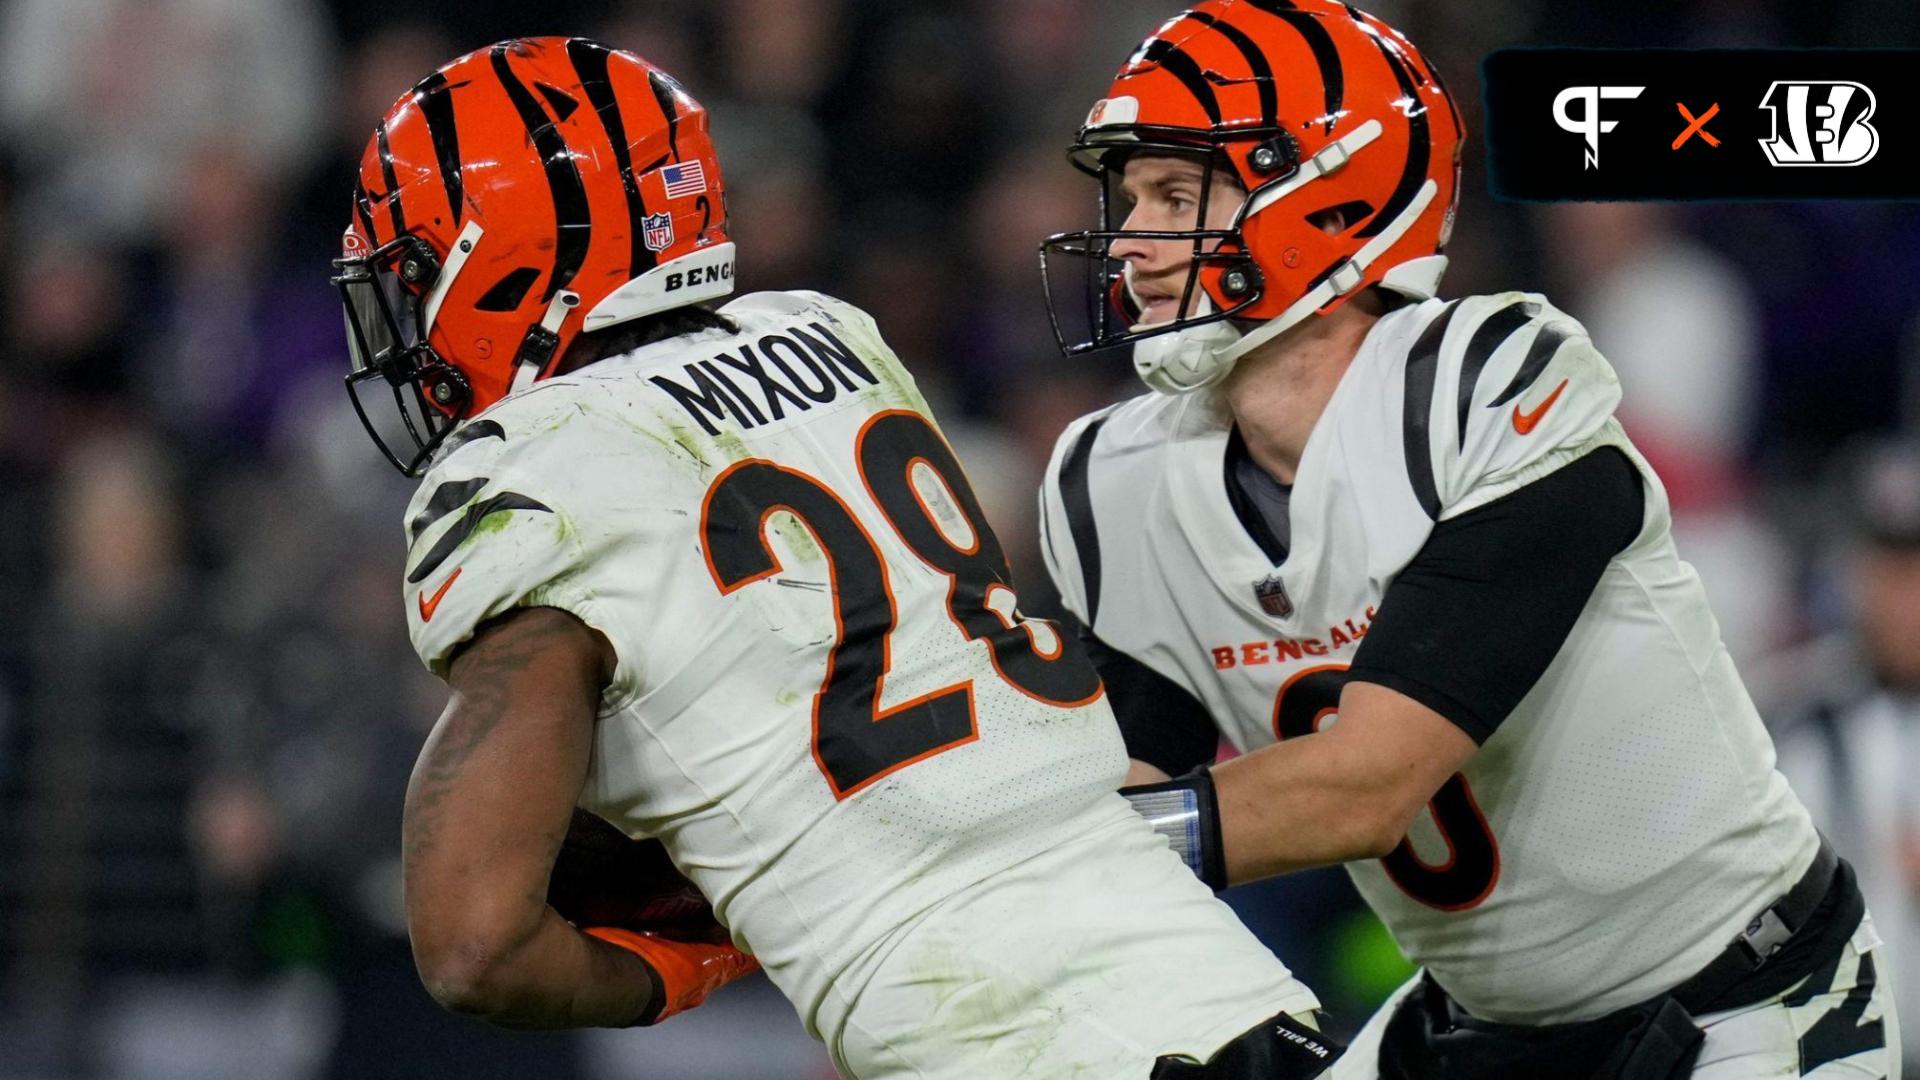 Cincinnati Bengals quarterback Jake Browning (6) hands off to running back Joe Mixon (28) in the fourth quarter of the NFL Week 11 game between the Baltimore Ravens and the Cincinnati Bengals at M&T Bank Stadium.